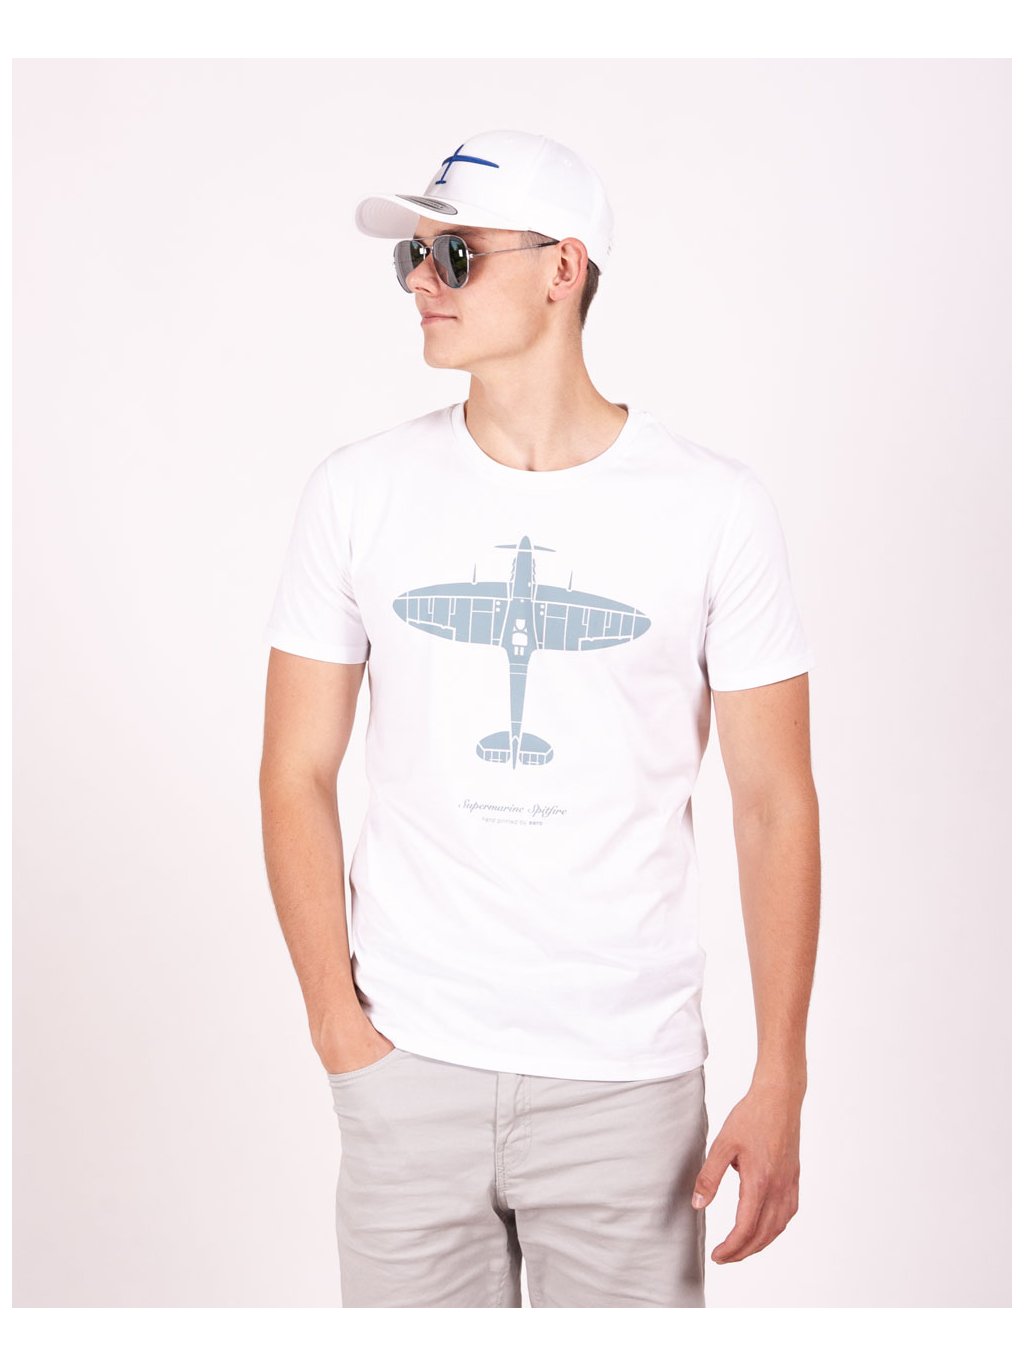 mens white tshirt print spitfire aircraft produced by eeroplane brand